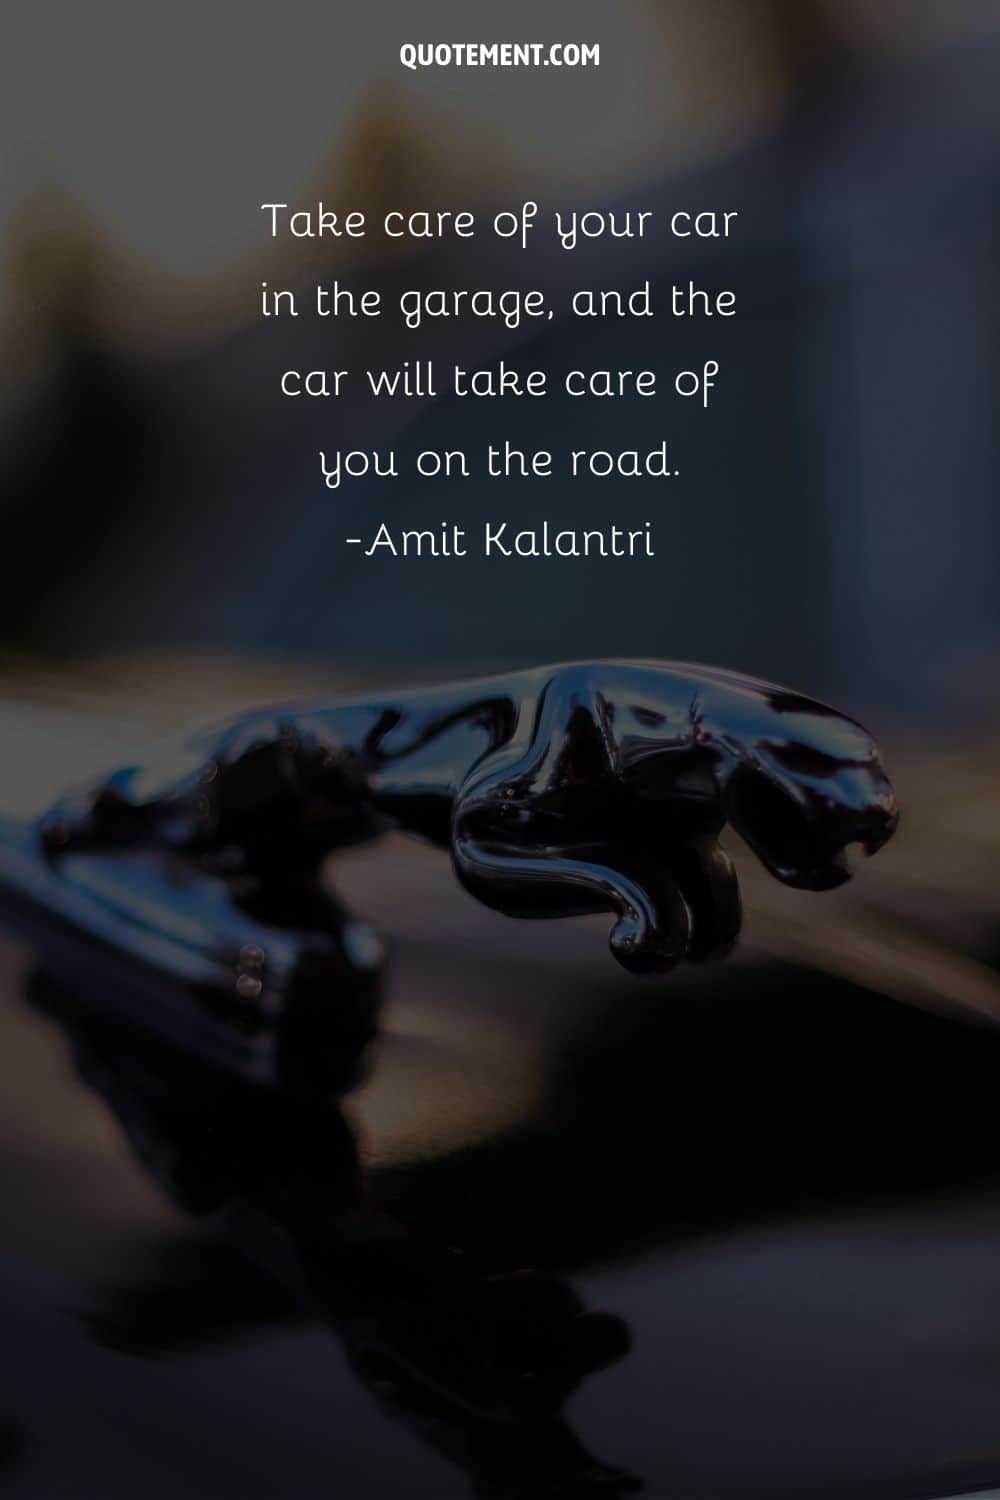 “Take care of your car in the garage, and the car will take care of you on the road.”― Amit Kalantri, Wealth of Words